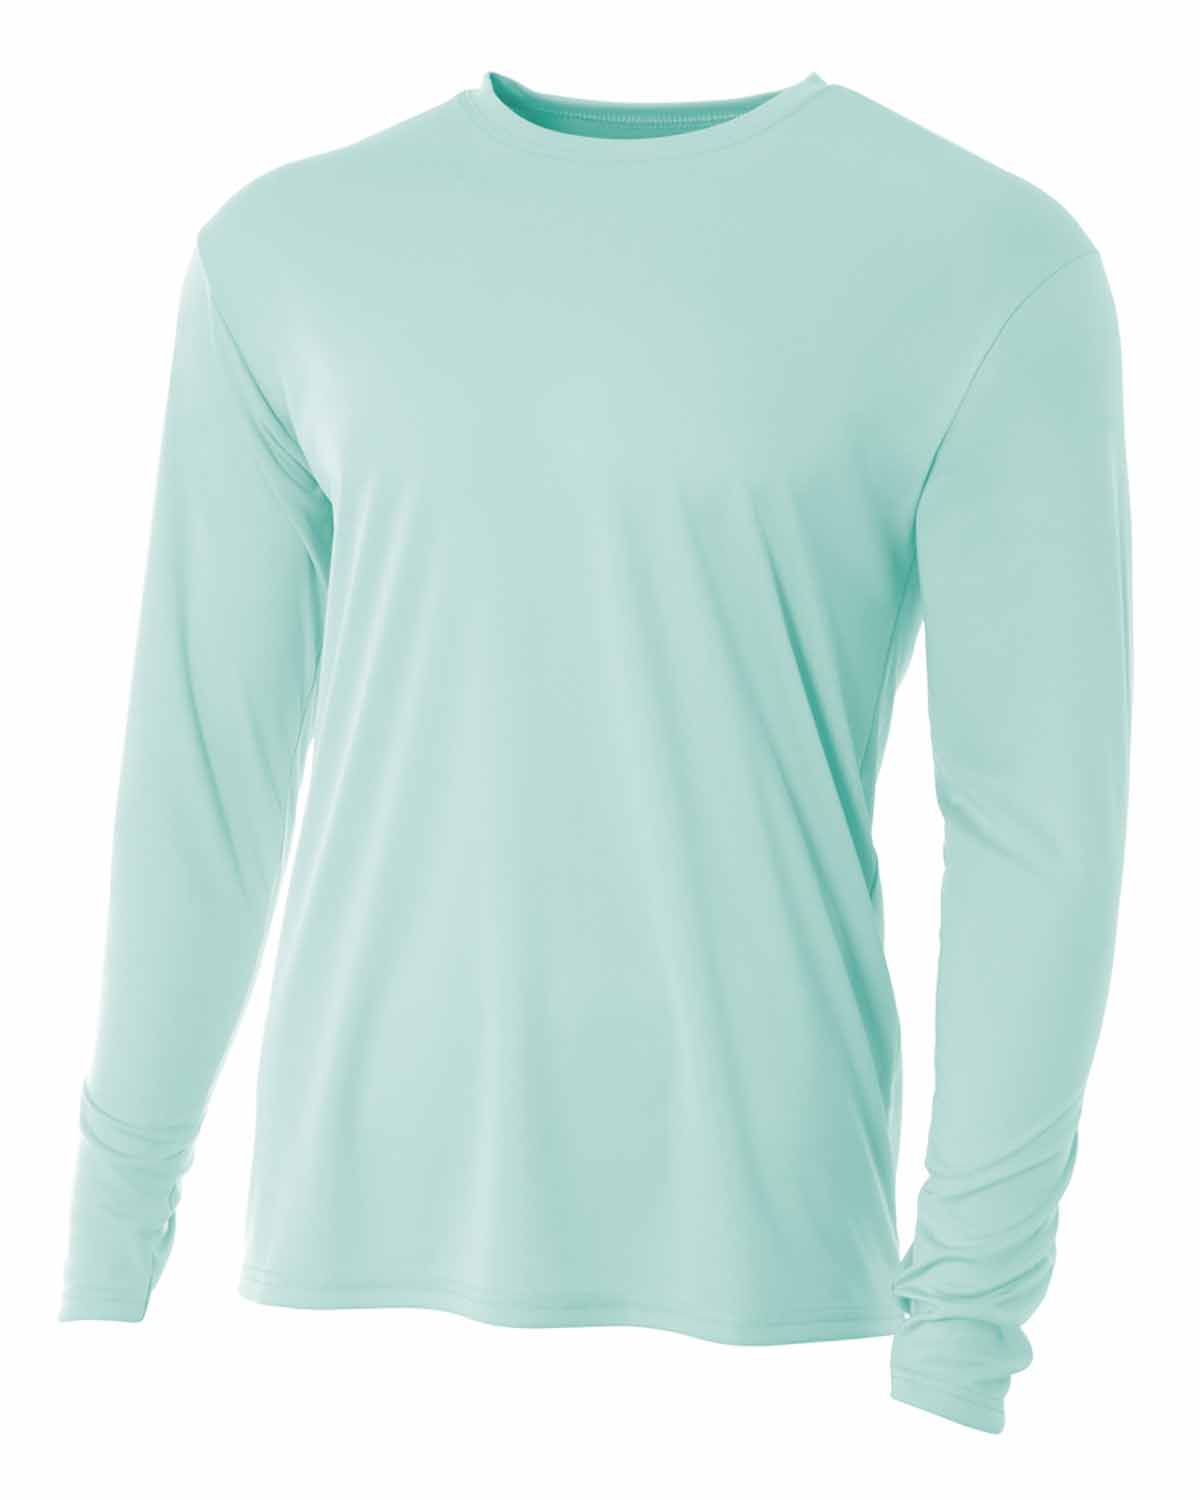 click to view PASTEL MINT